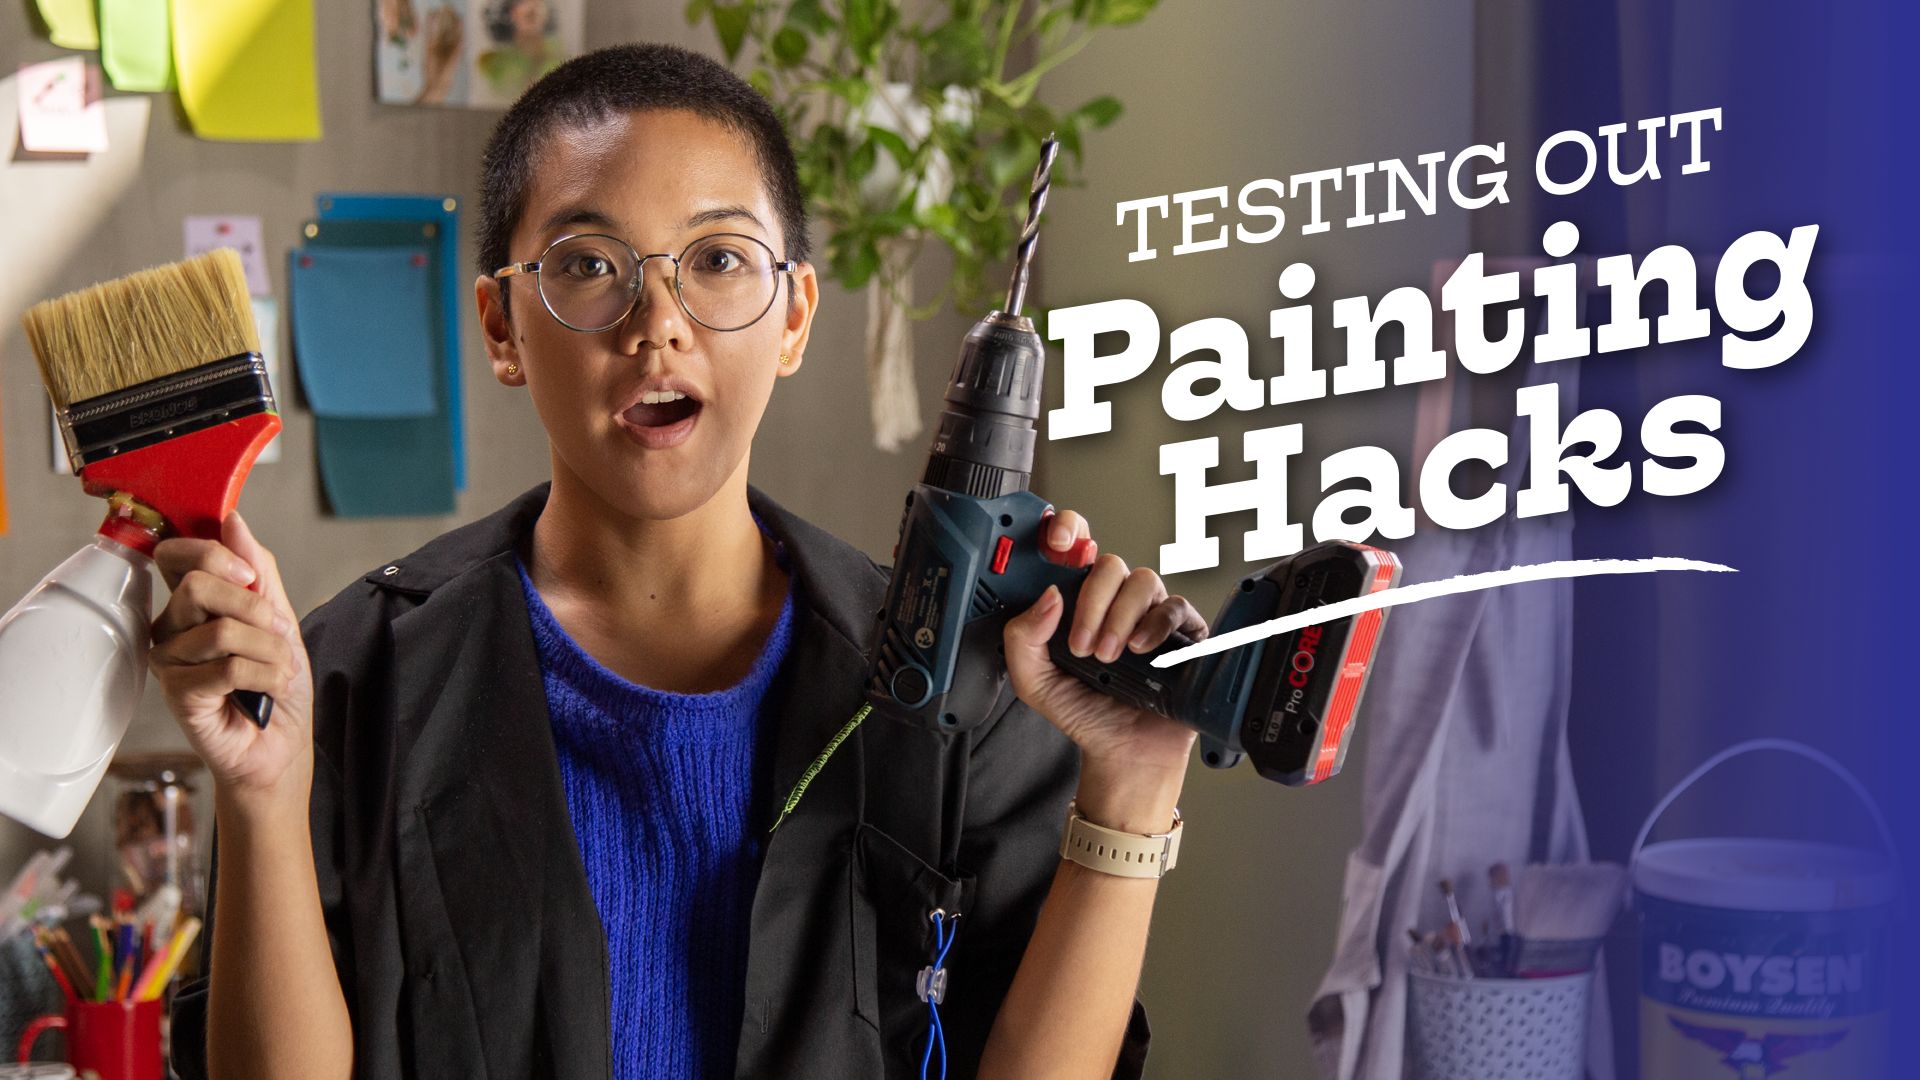 BUILD WITH B
PAINTING HACKS